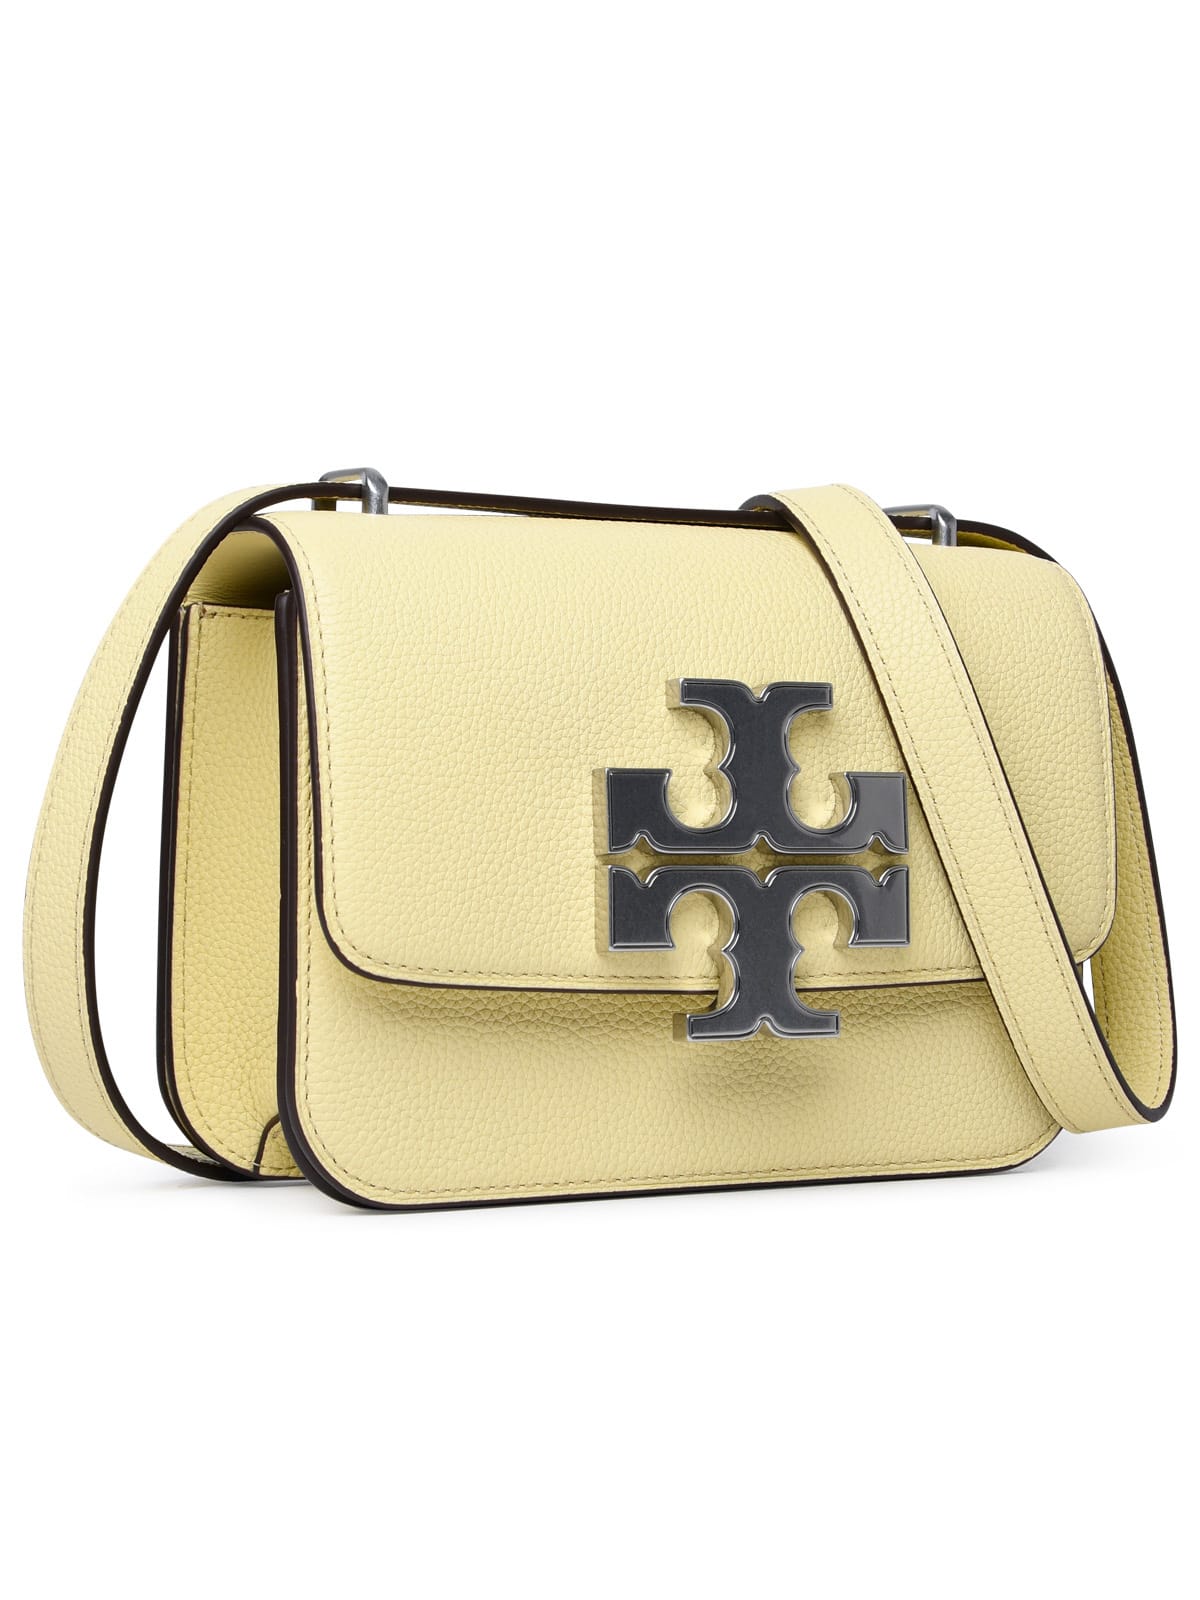 Shop Tory Burch Small Eleanor Yellow Leather Bag